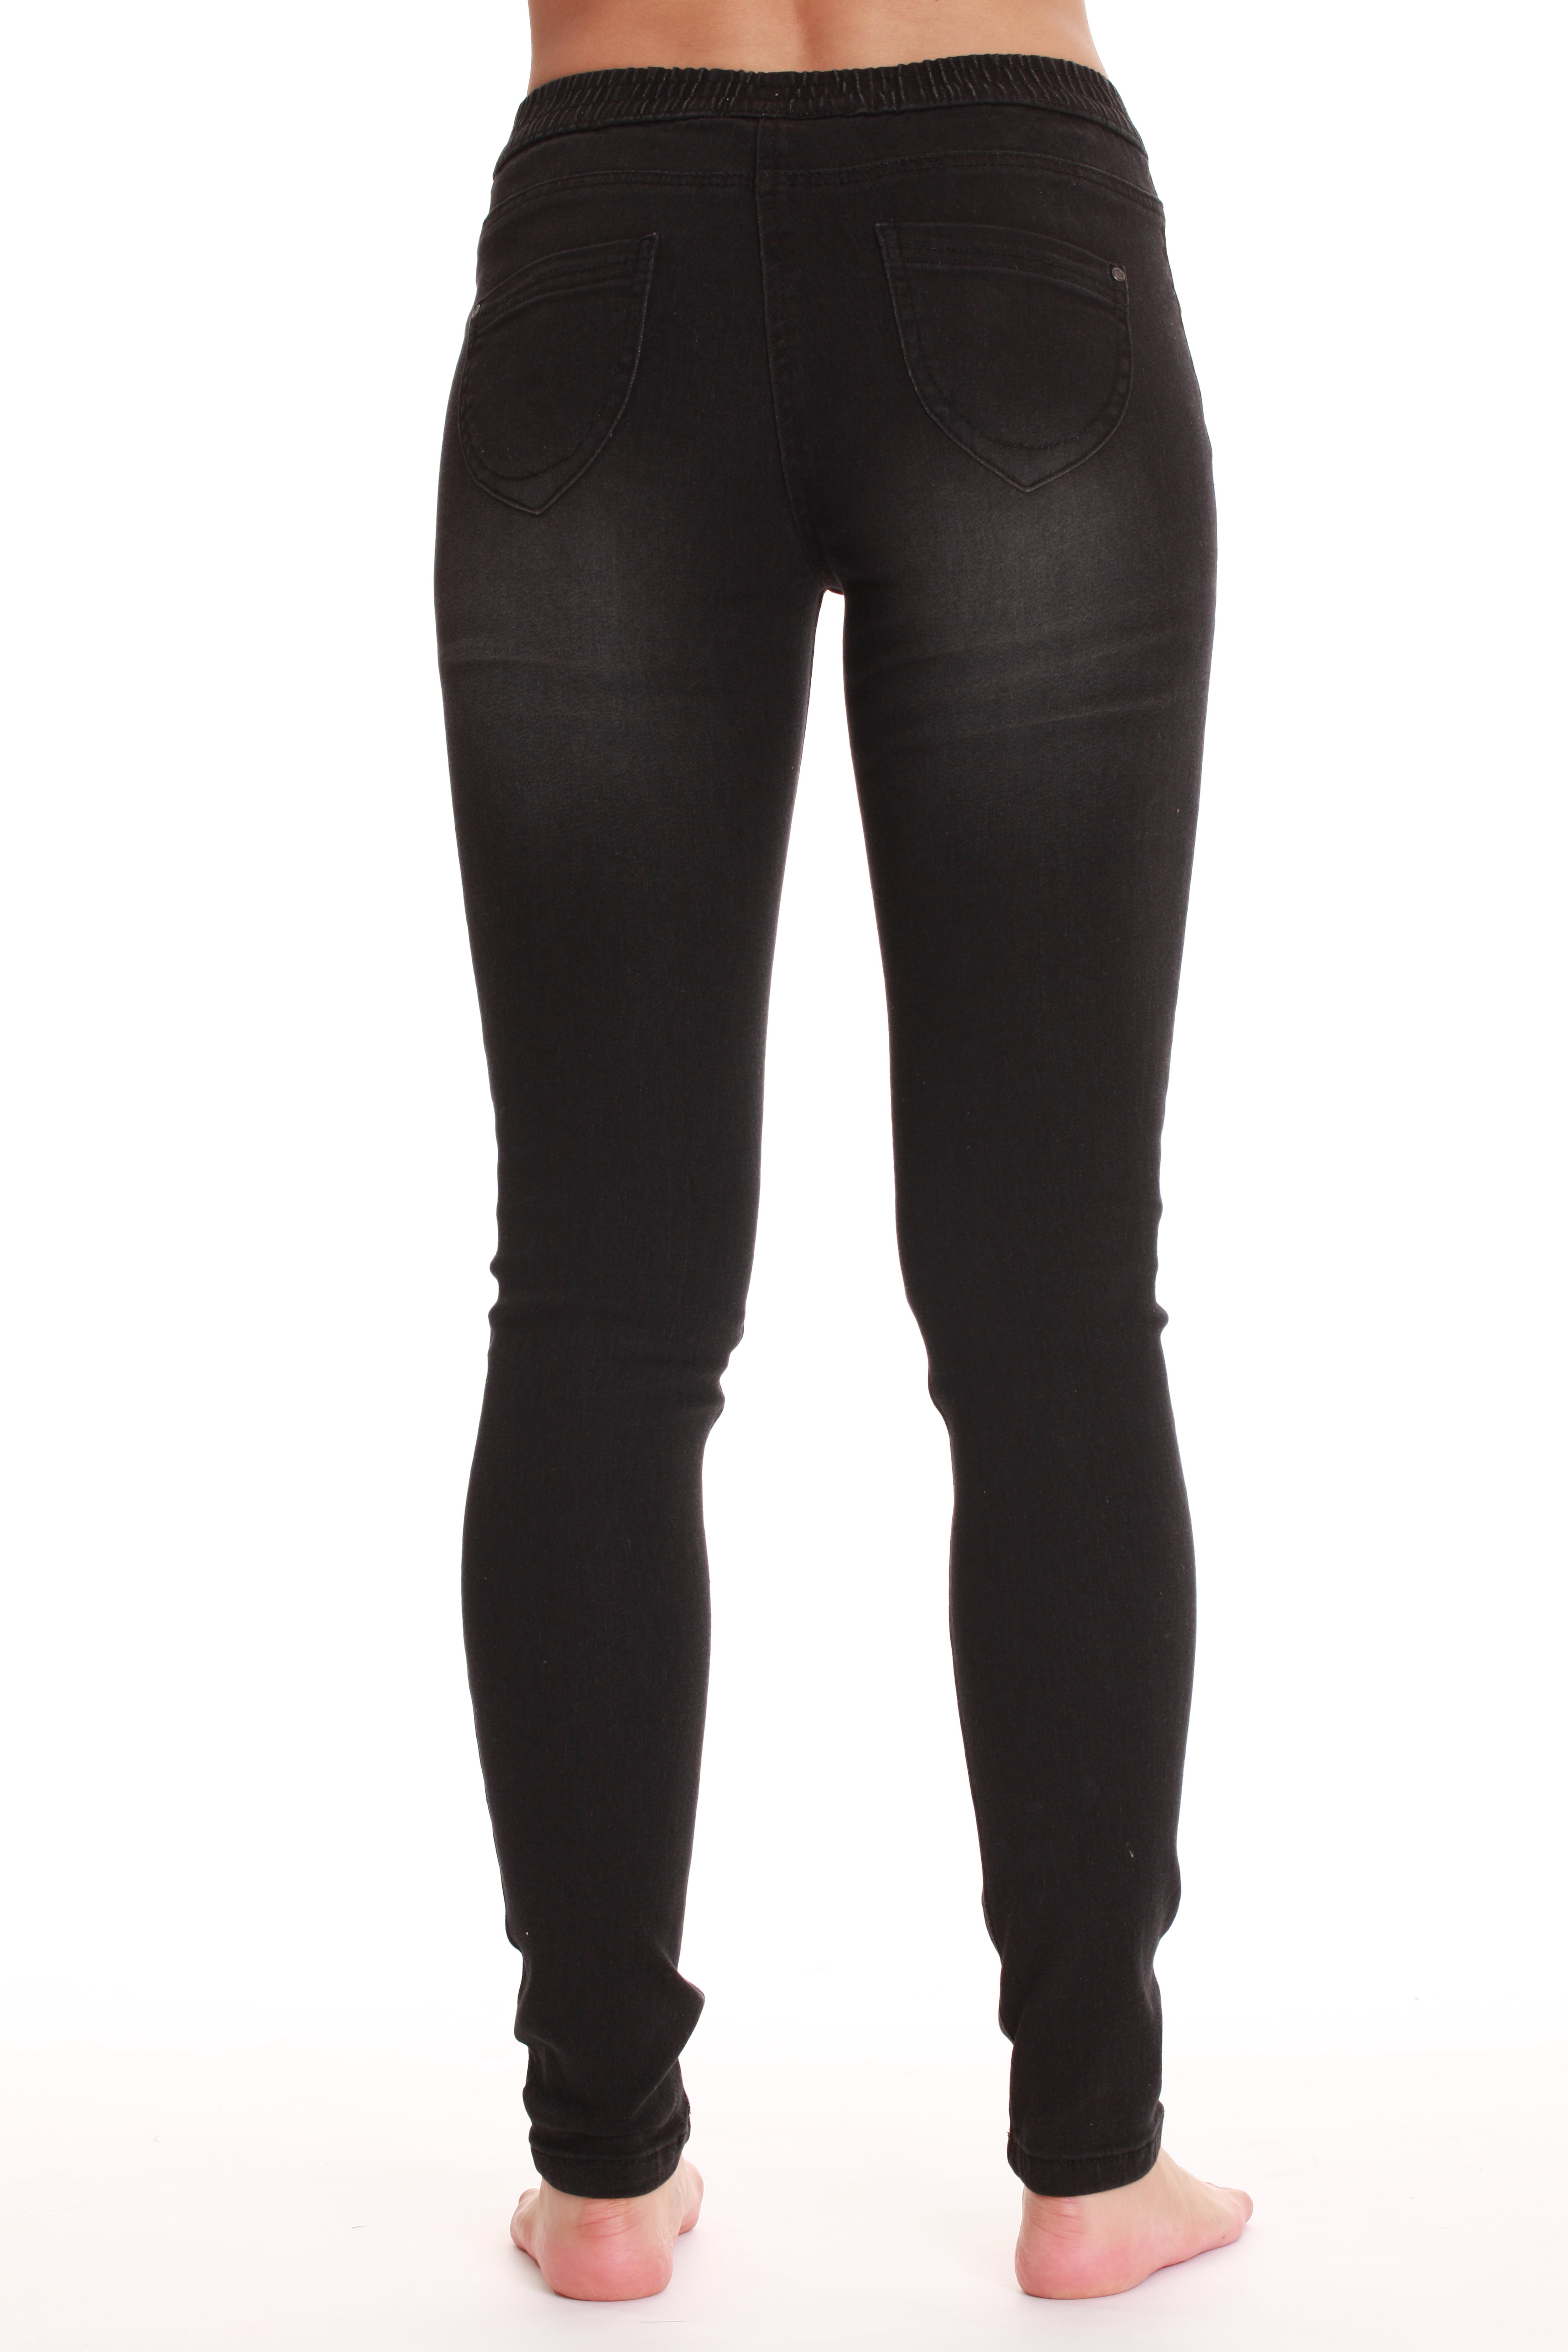 Just Love Denim Jeggings for Women with Pockets Comfortable